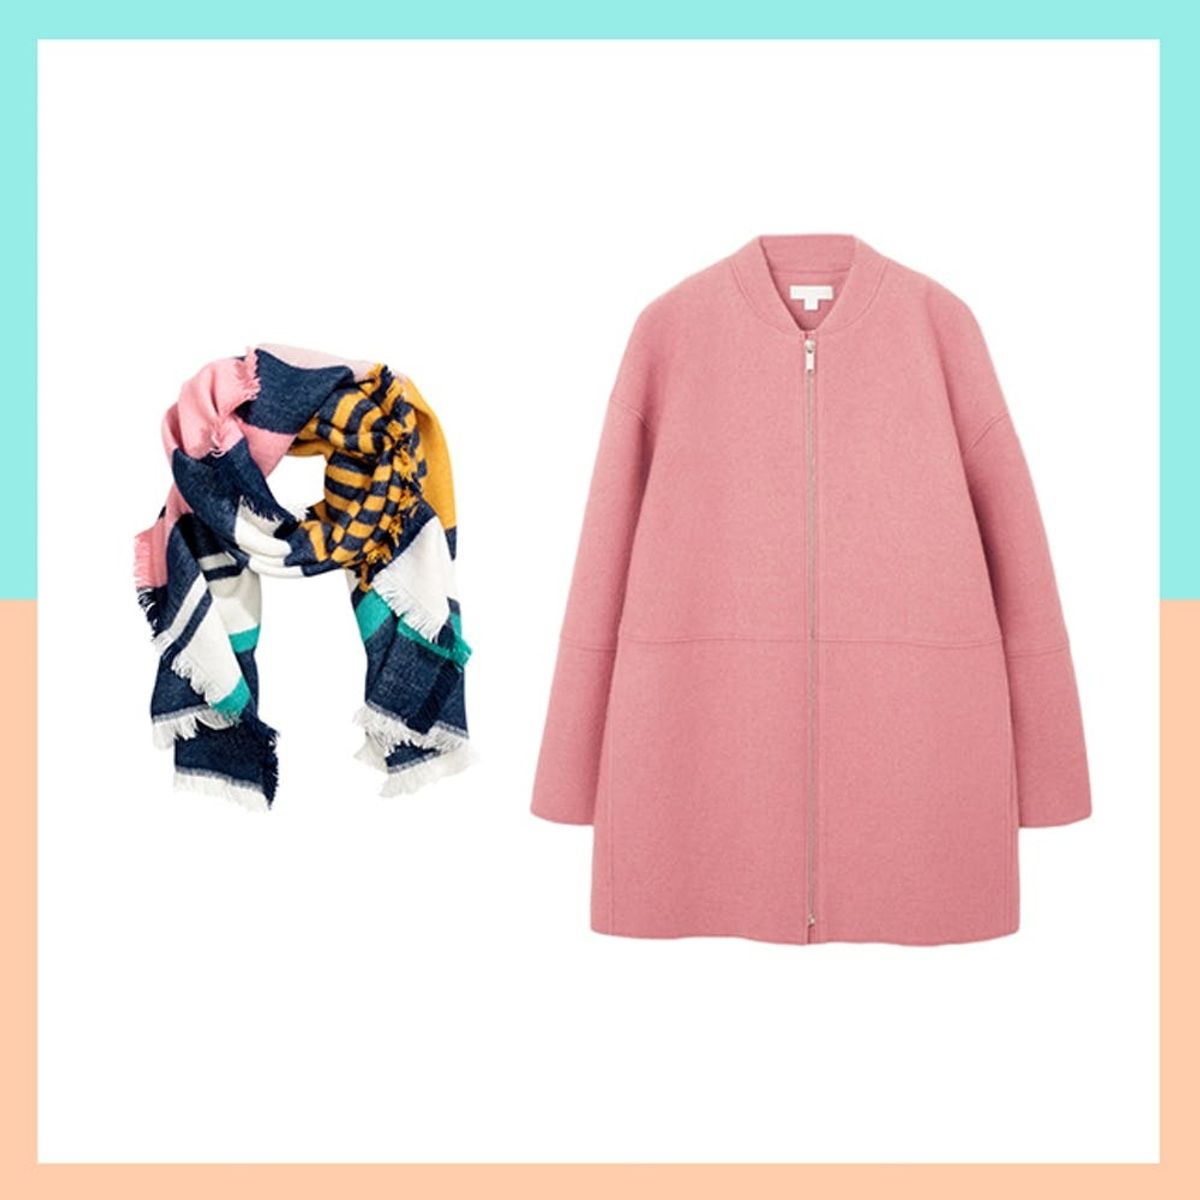 11 Jacket and Scarf Pairings to Snuggle Up in All Season Long